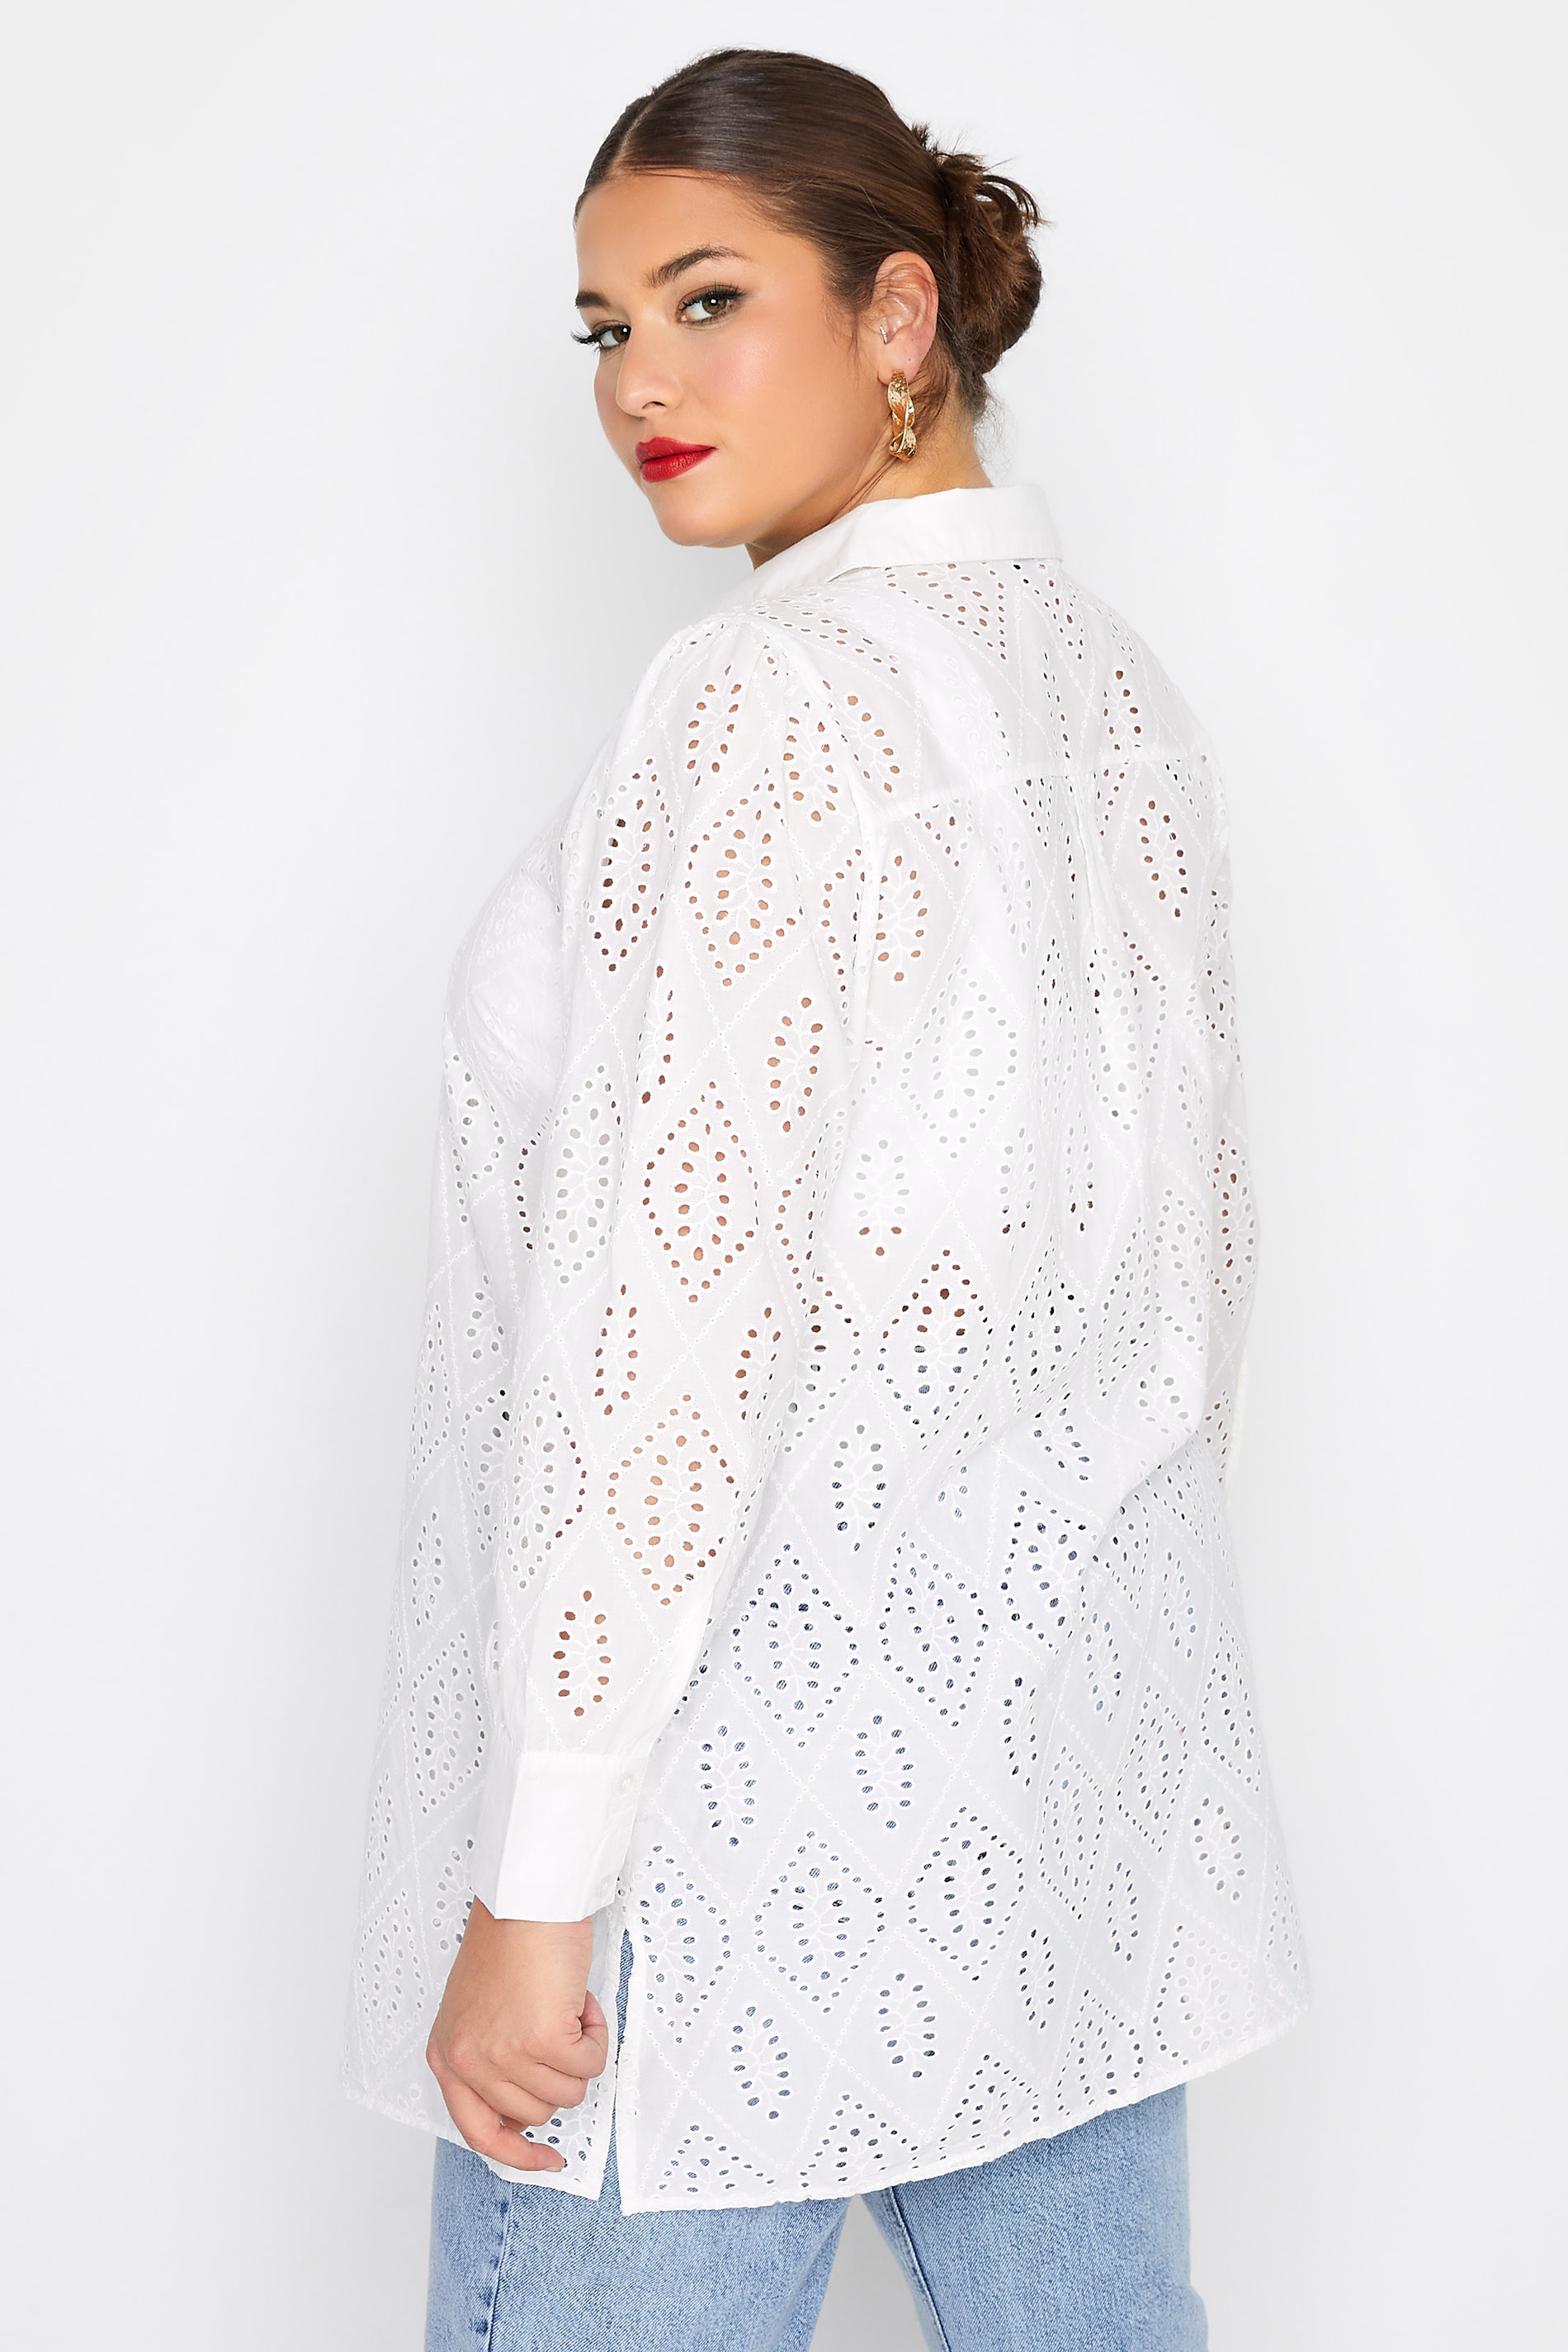 Grande taille  Tops Grande taille  Blouses & Chemisiers | LIMITED COLLECTION - Chemisier Blanc Manches Longues Broderie Anglaise - PI74824